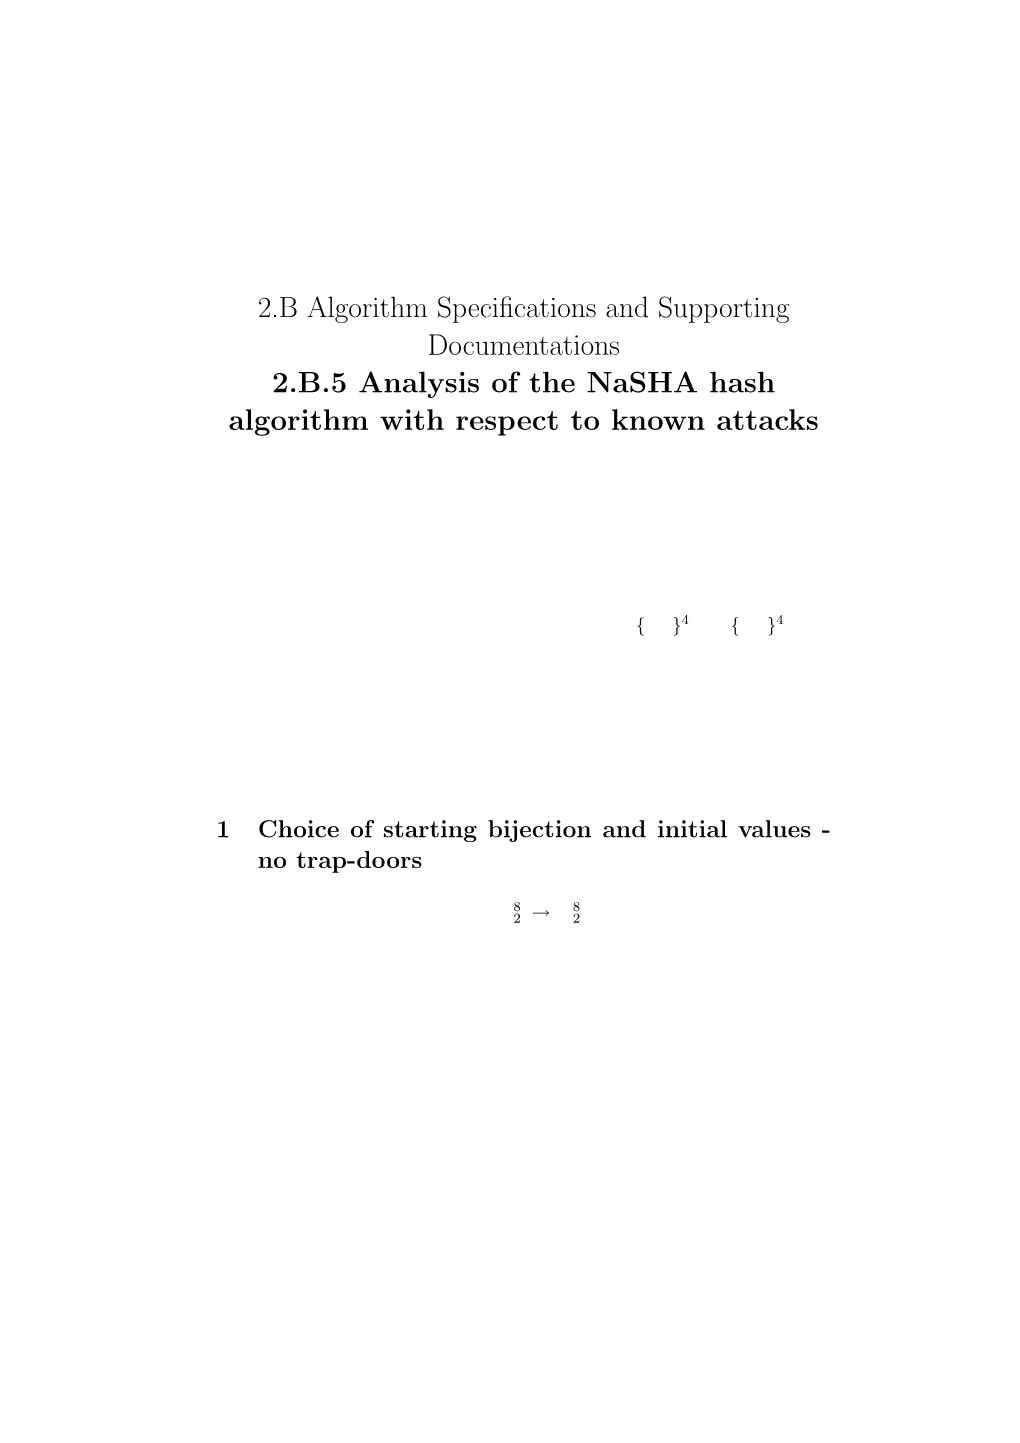 2.B Algorithm Specifications and Supporting Documentations 2.B.5